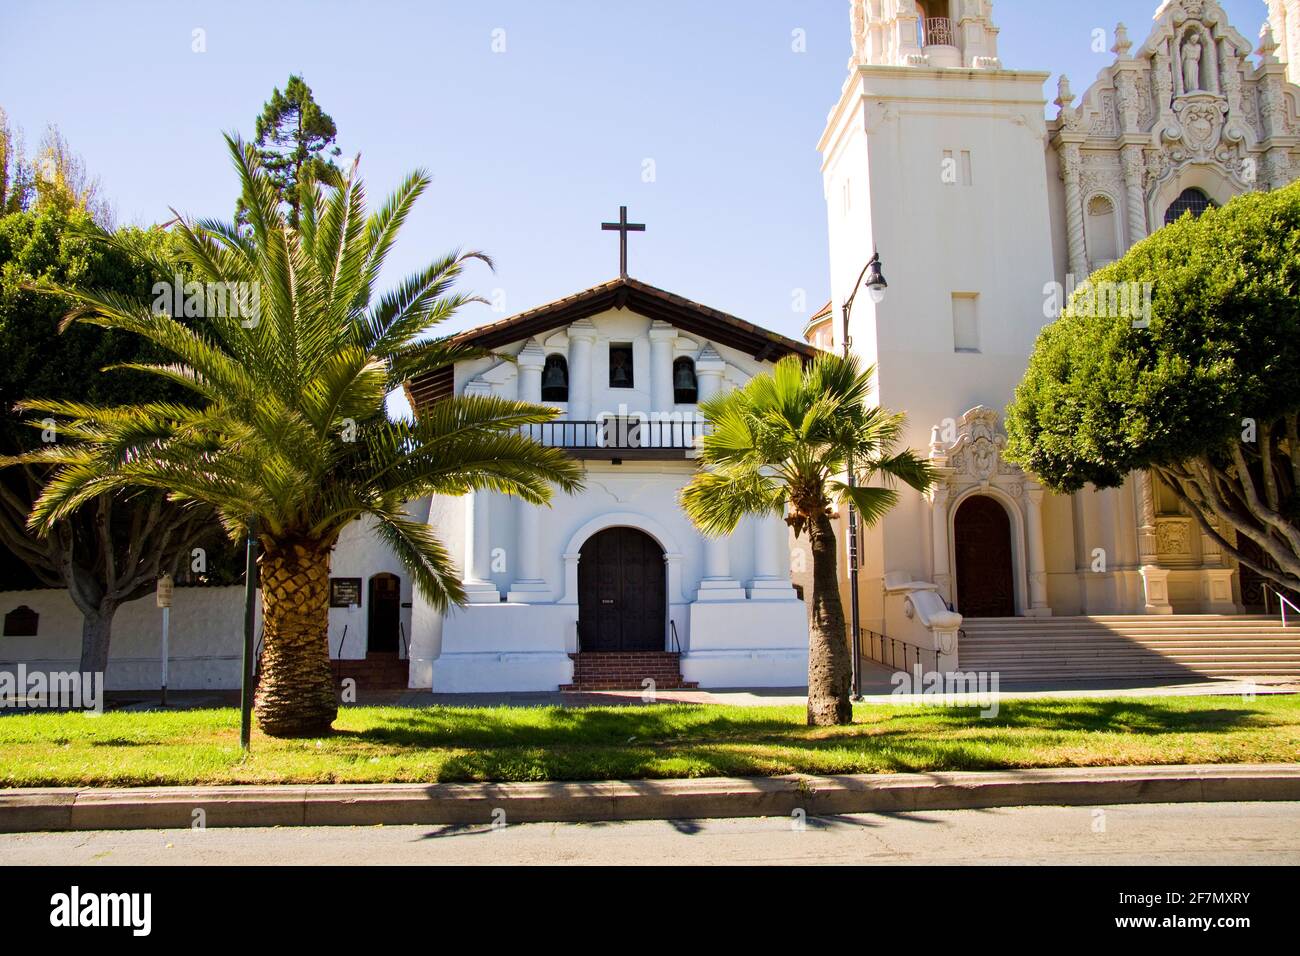 Mission San Francisco de Asís - Mission Dolores, 1776, is a Spanish Californian mission and the oldest surviving structure in San Francisco. District. Stock Photo